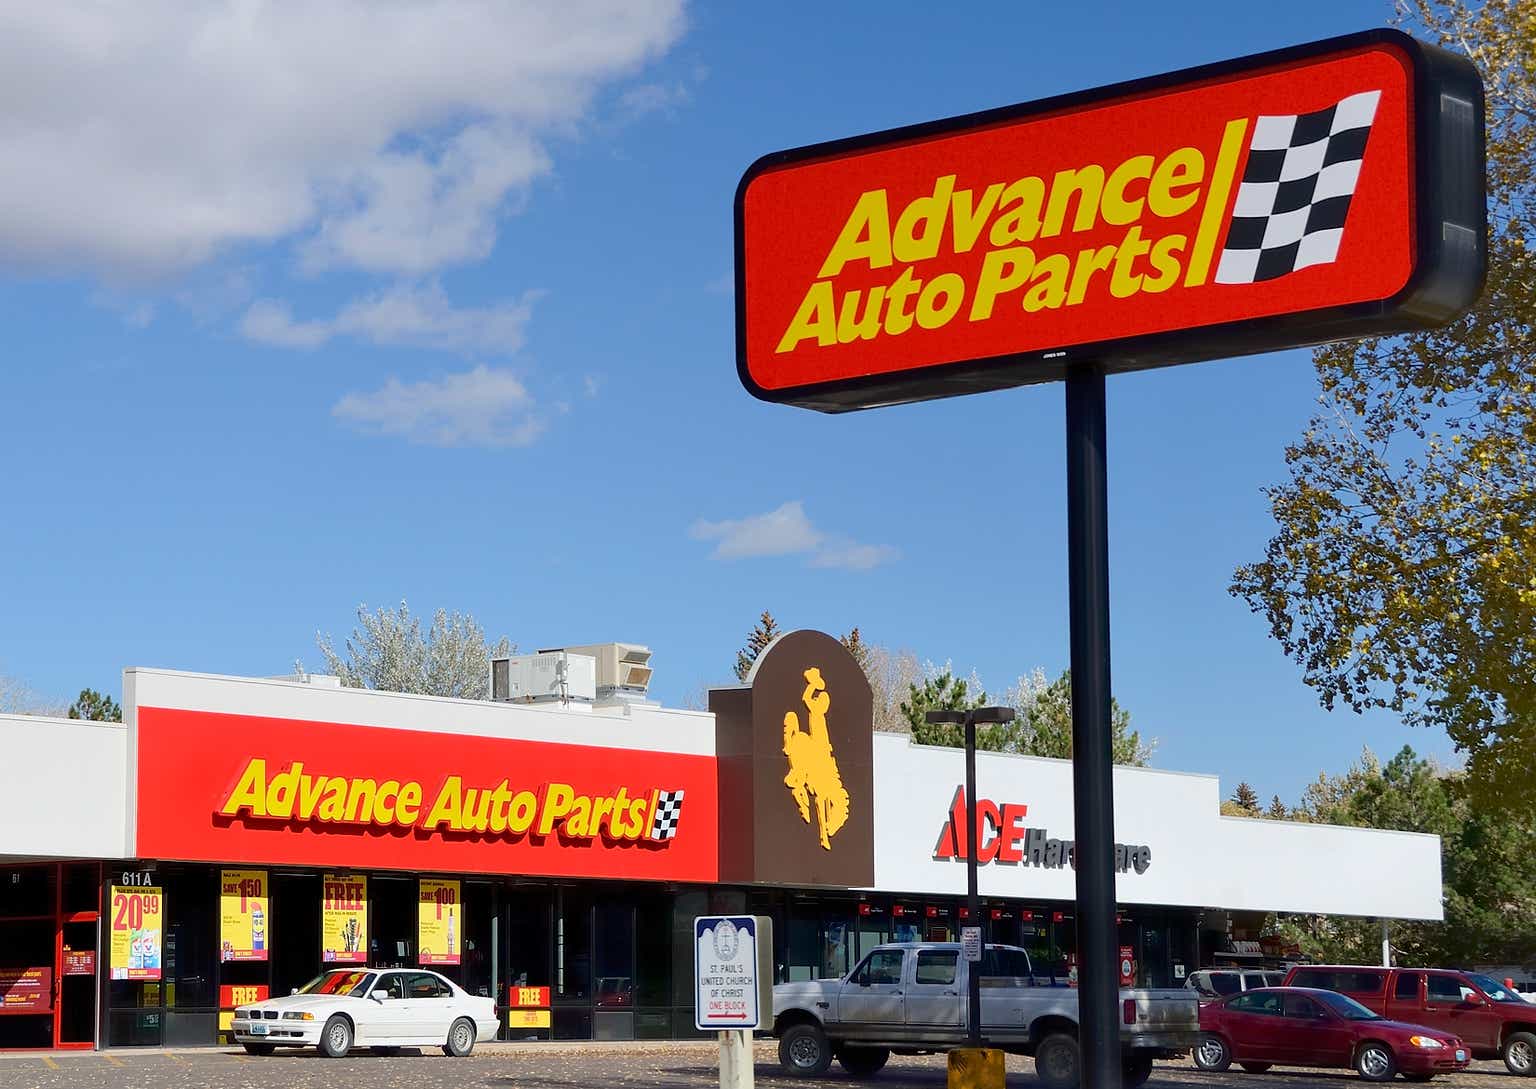 Advance Auto Parts: The New Normal